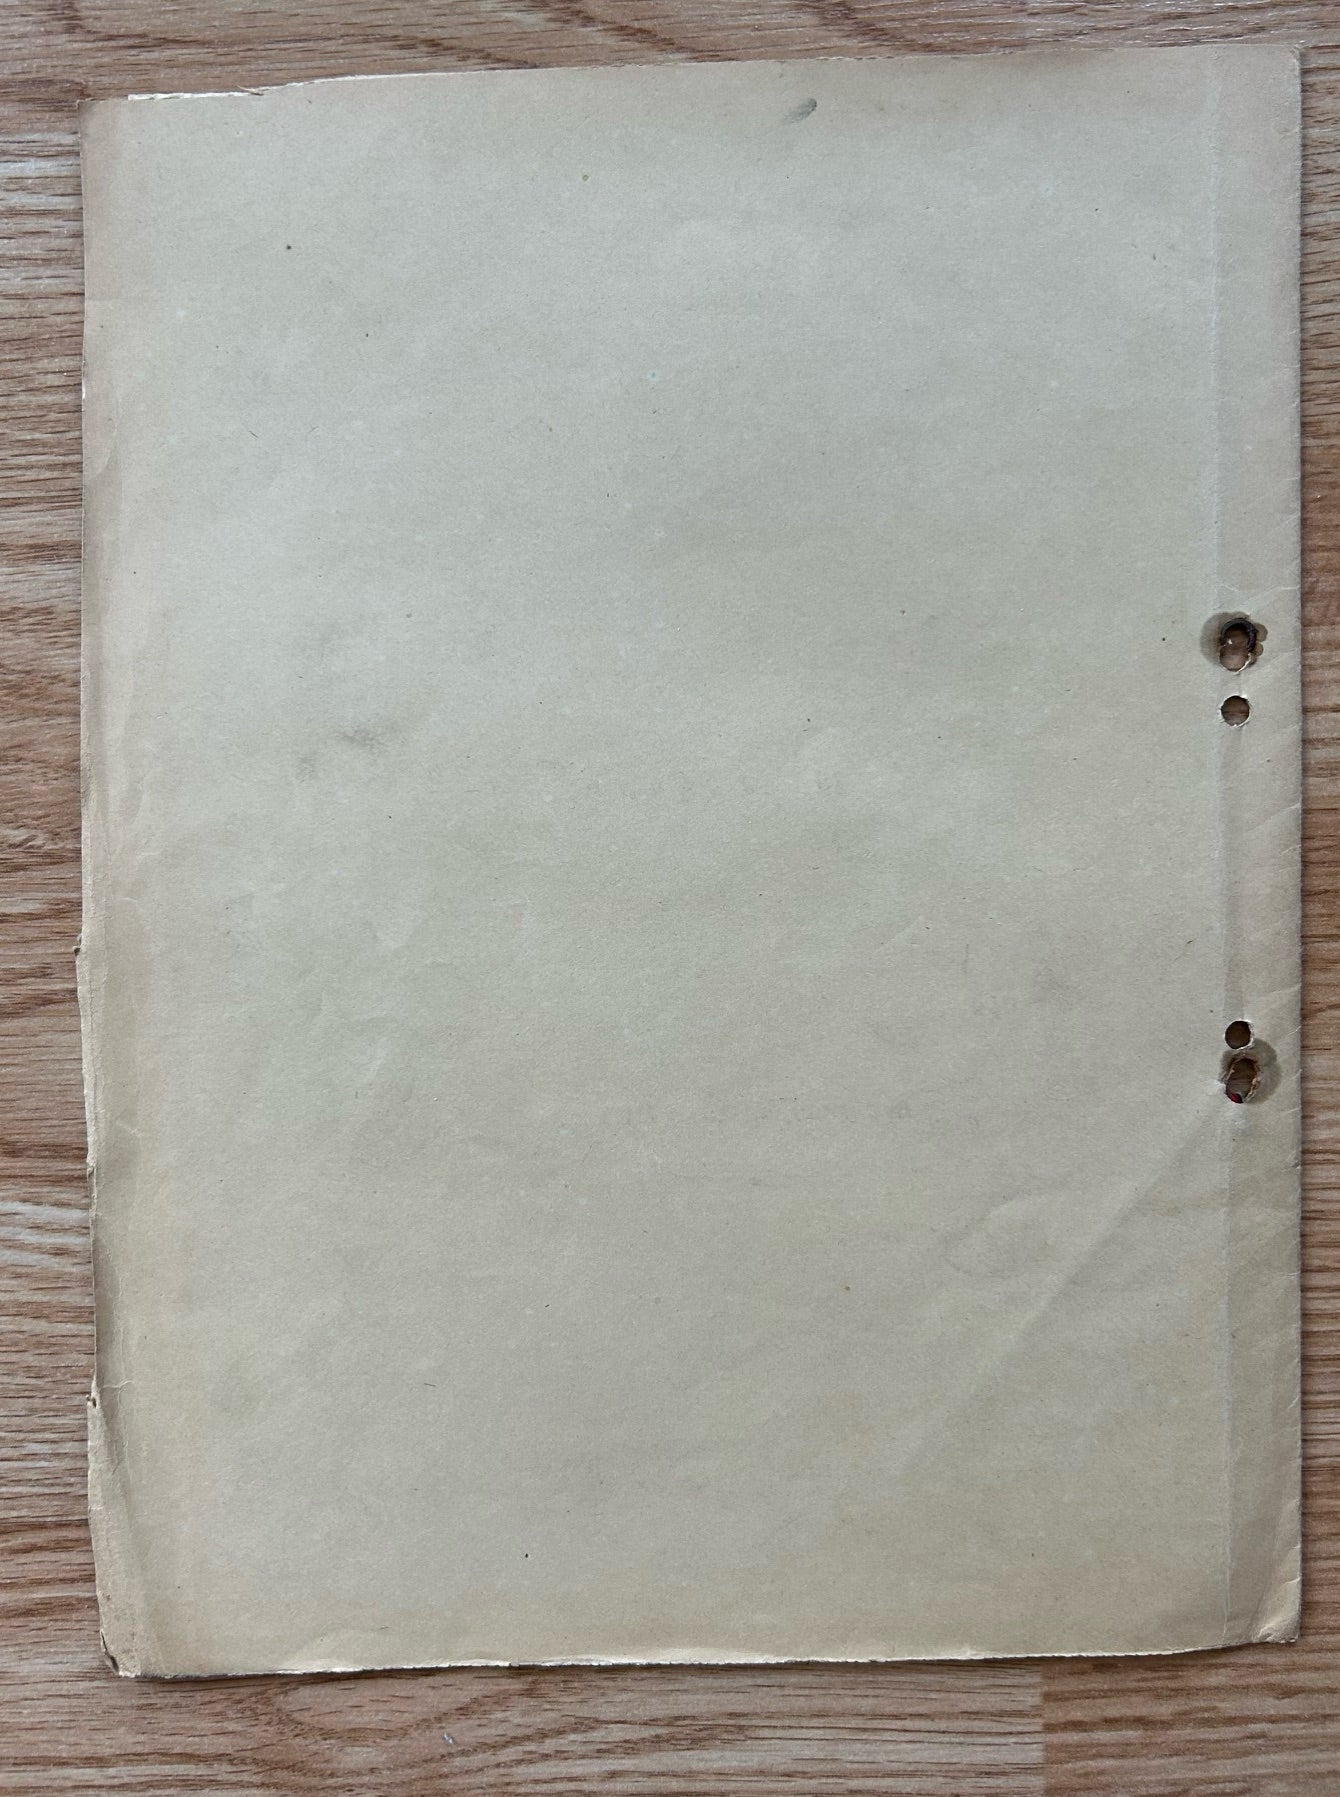 Two Third Reich notary documents - Kaiserslautern notary